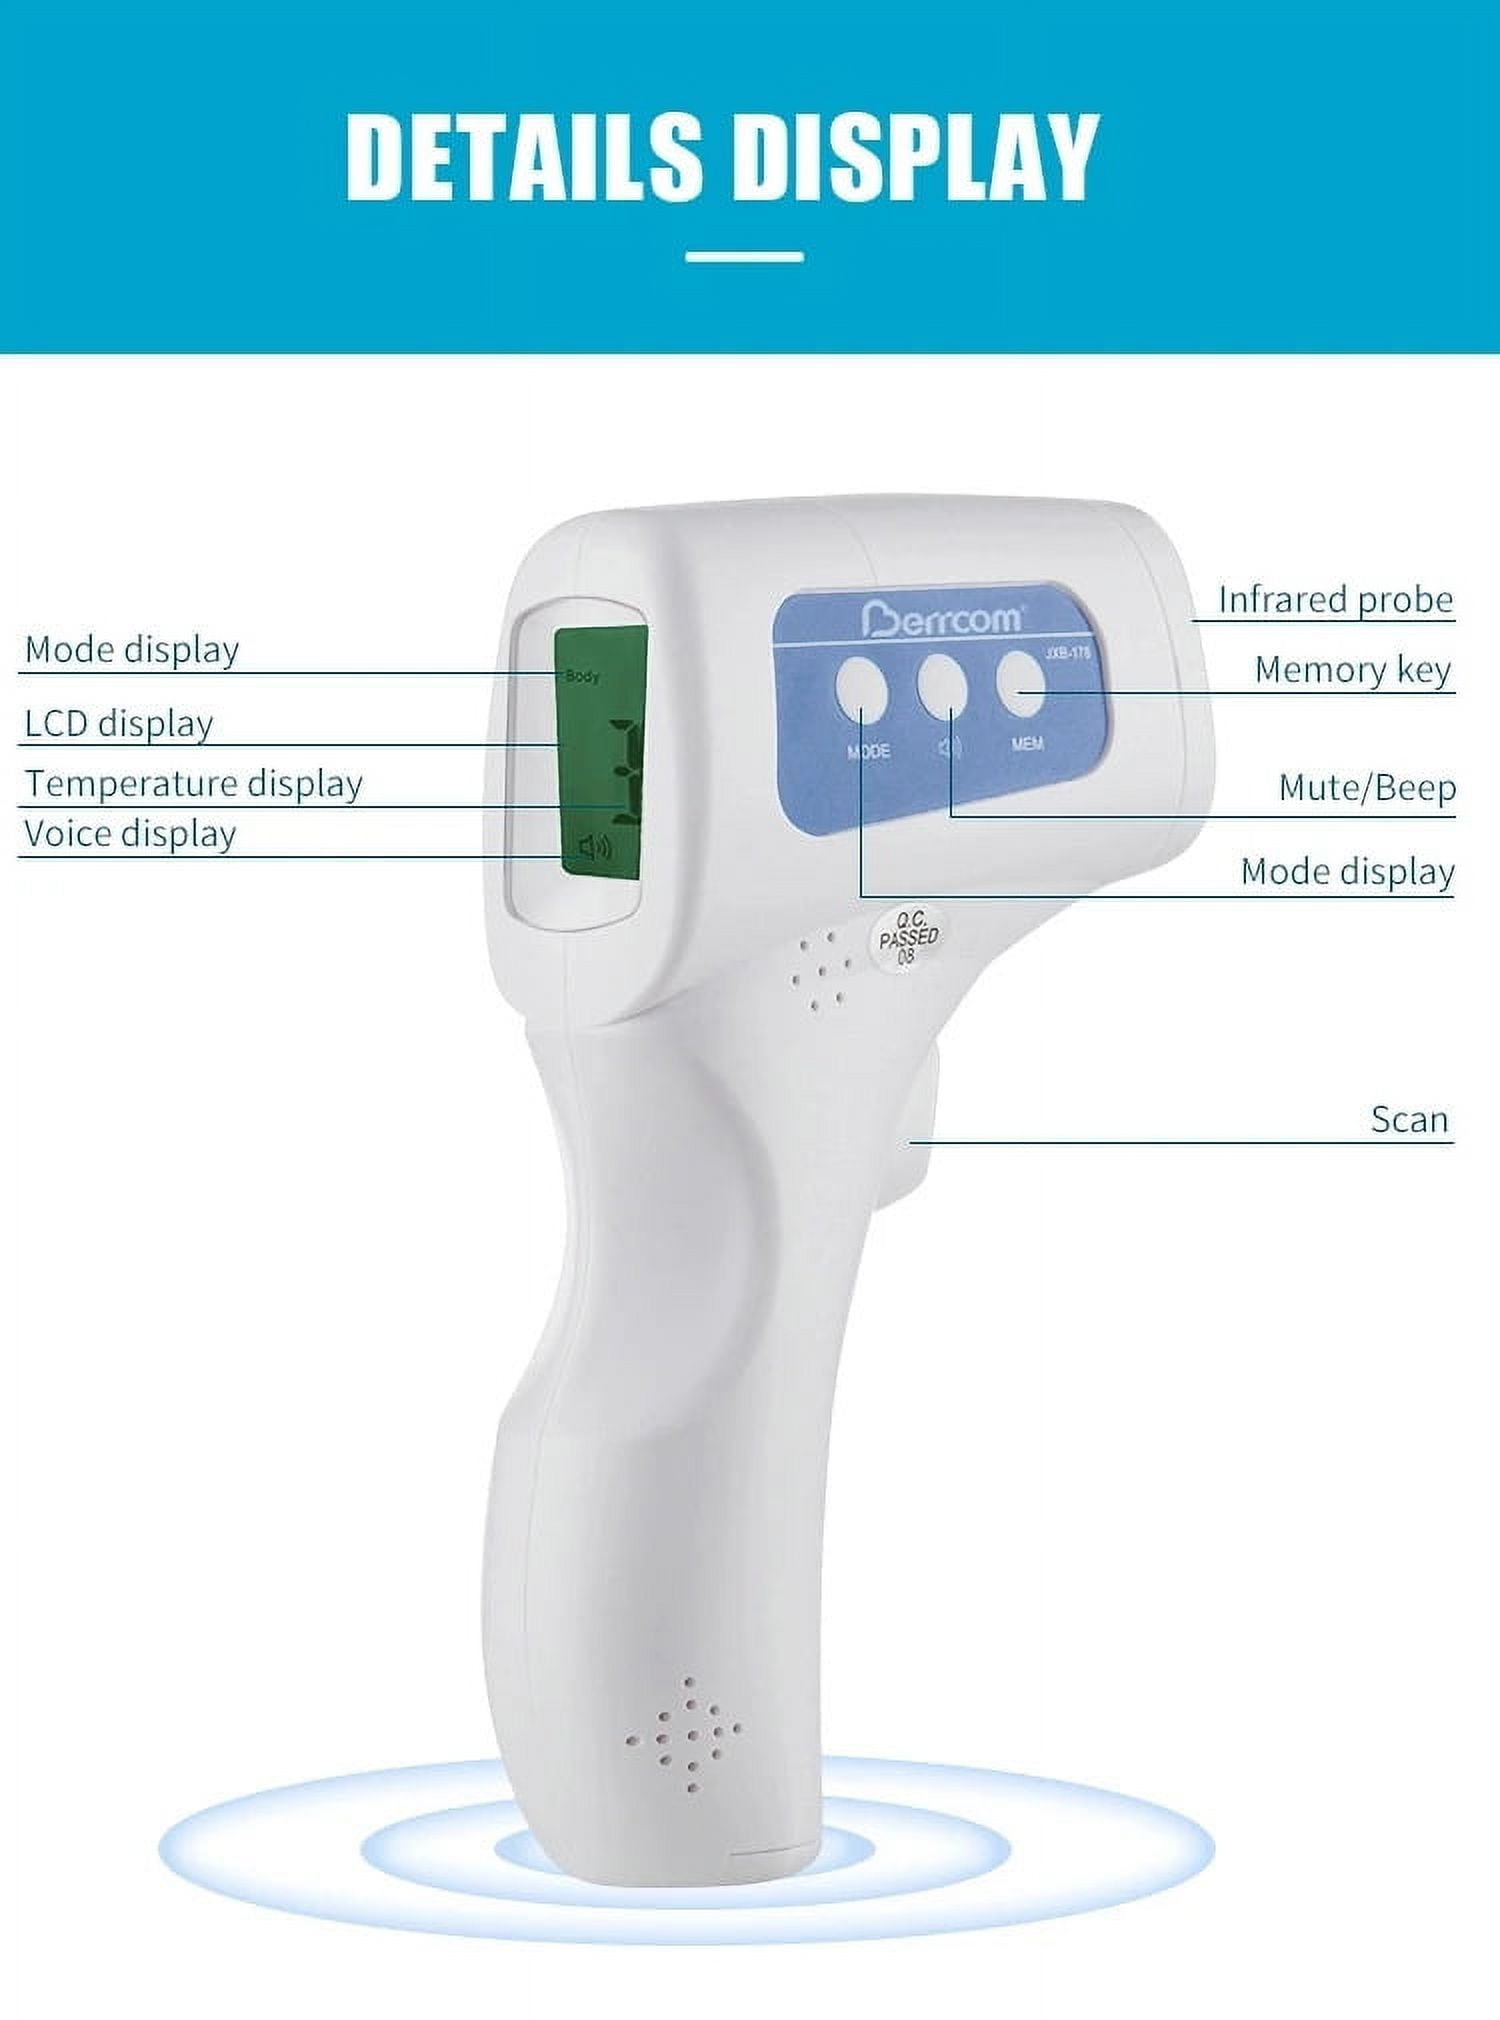 Berrcom Non-Contact Infrared Thermometer JXB-178 (Requires 2 AA batteries)  - White 